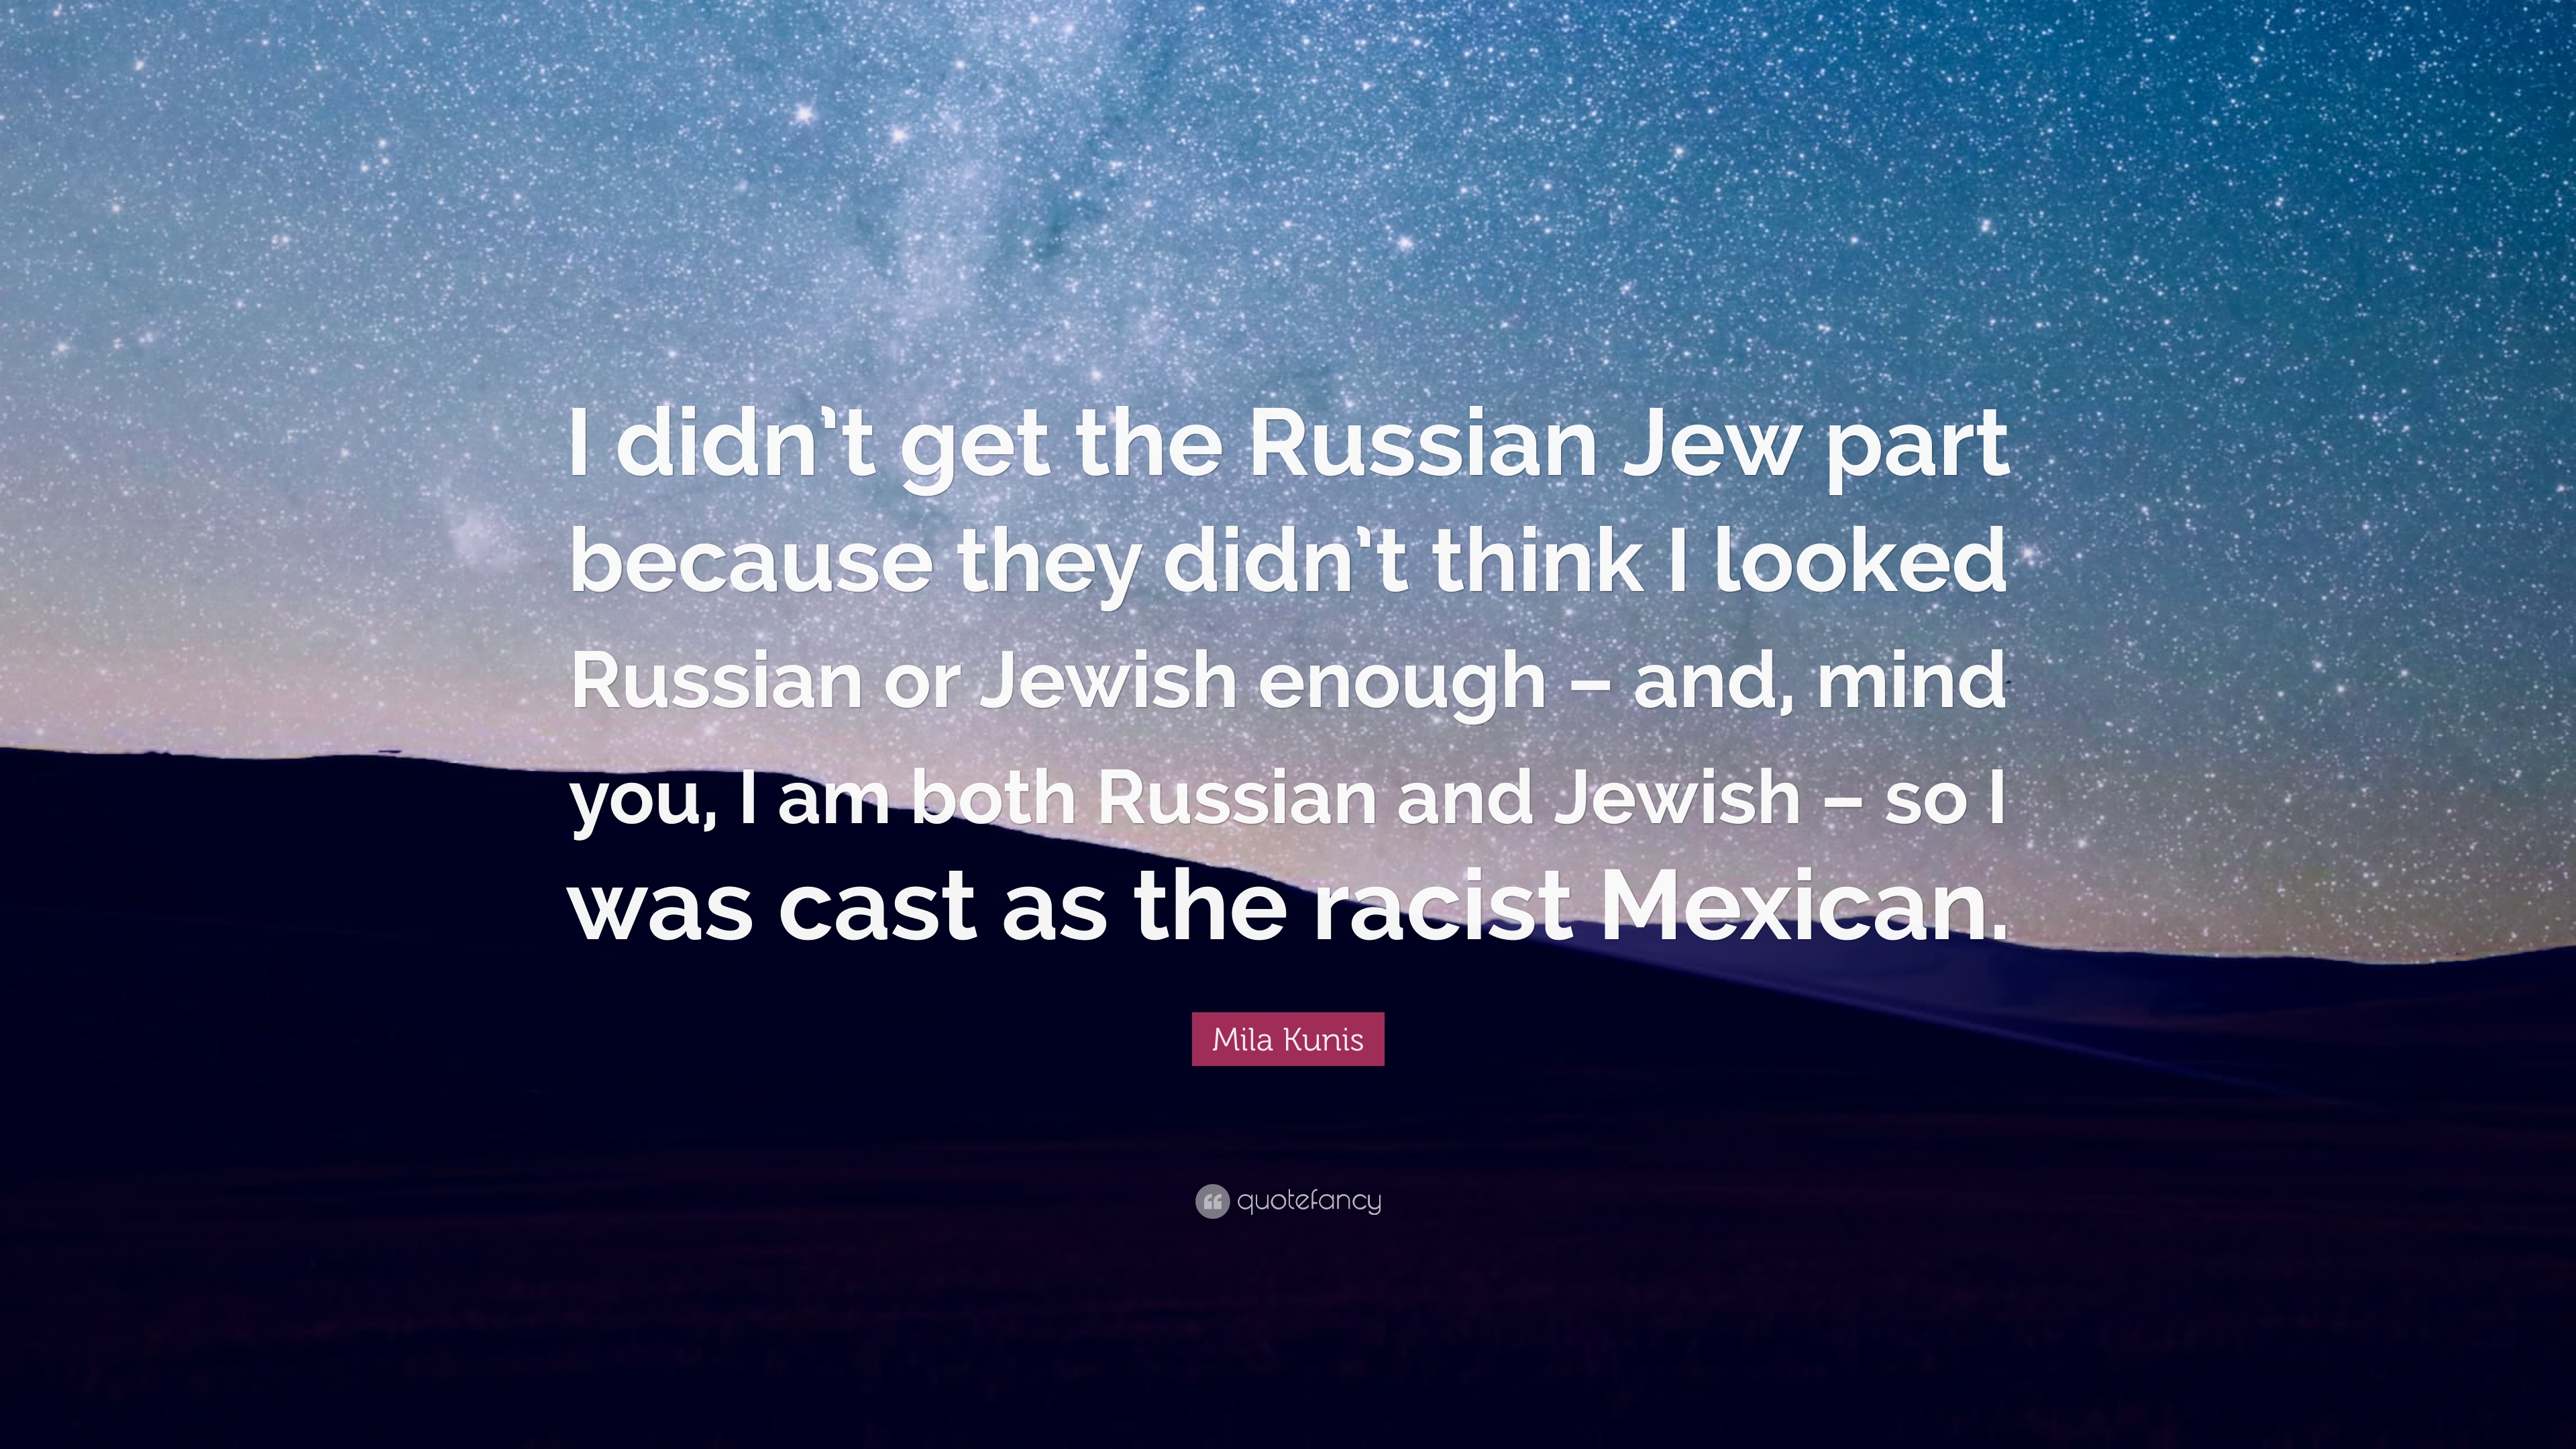 Mila Kunis Quote: “I didn't get the Russian Jew part because they